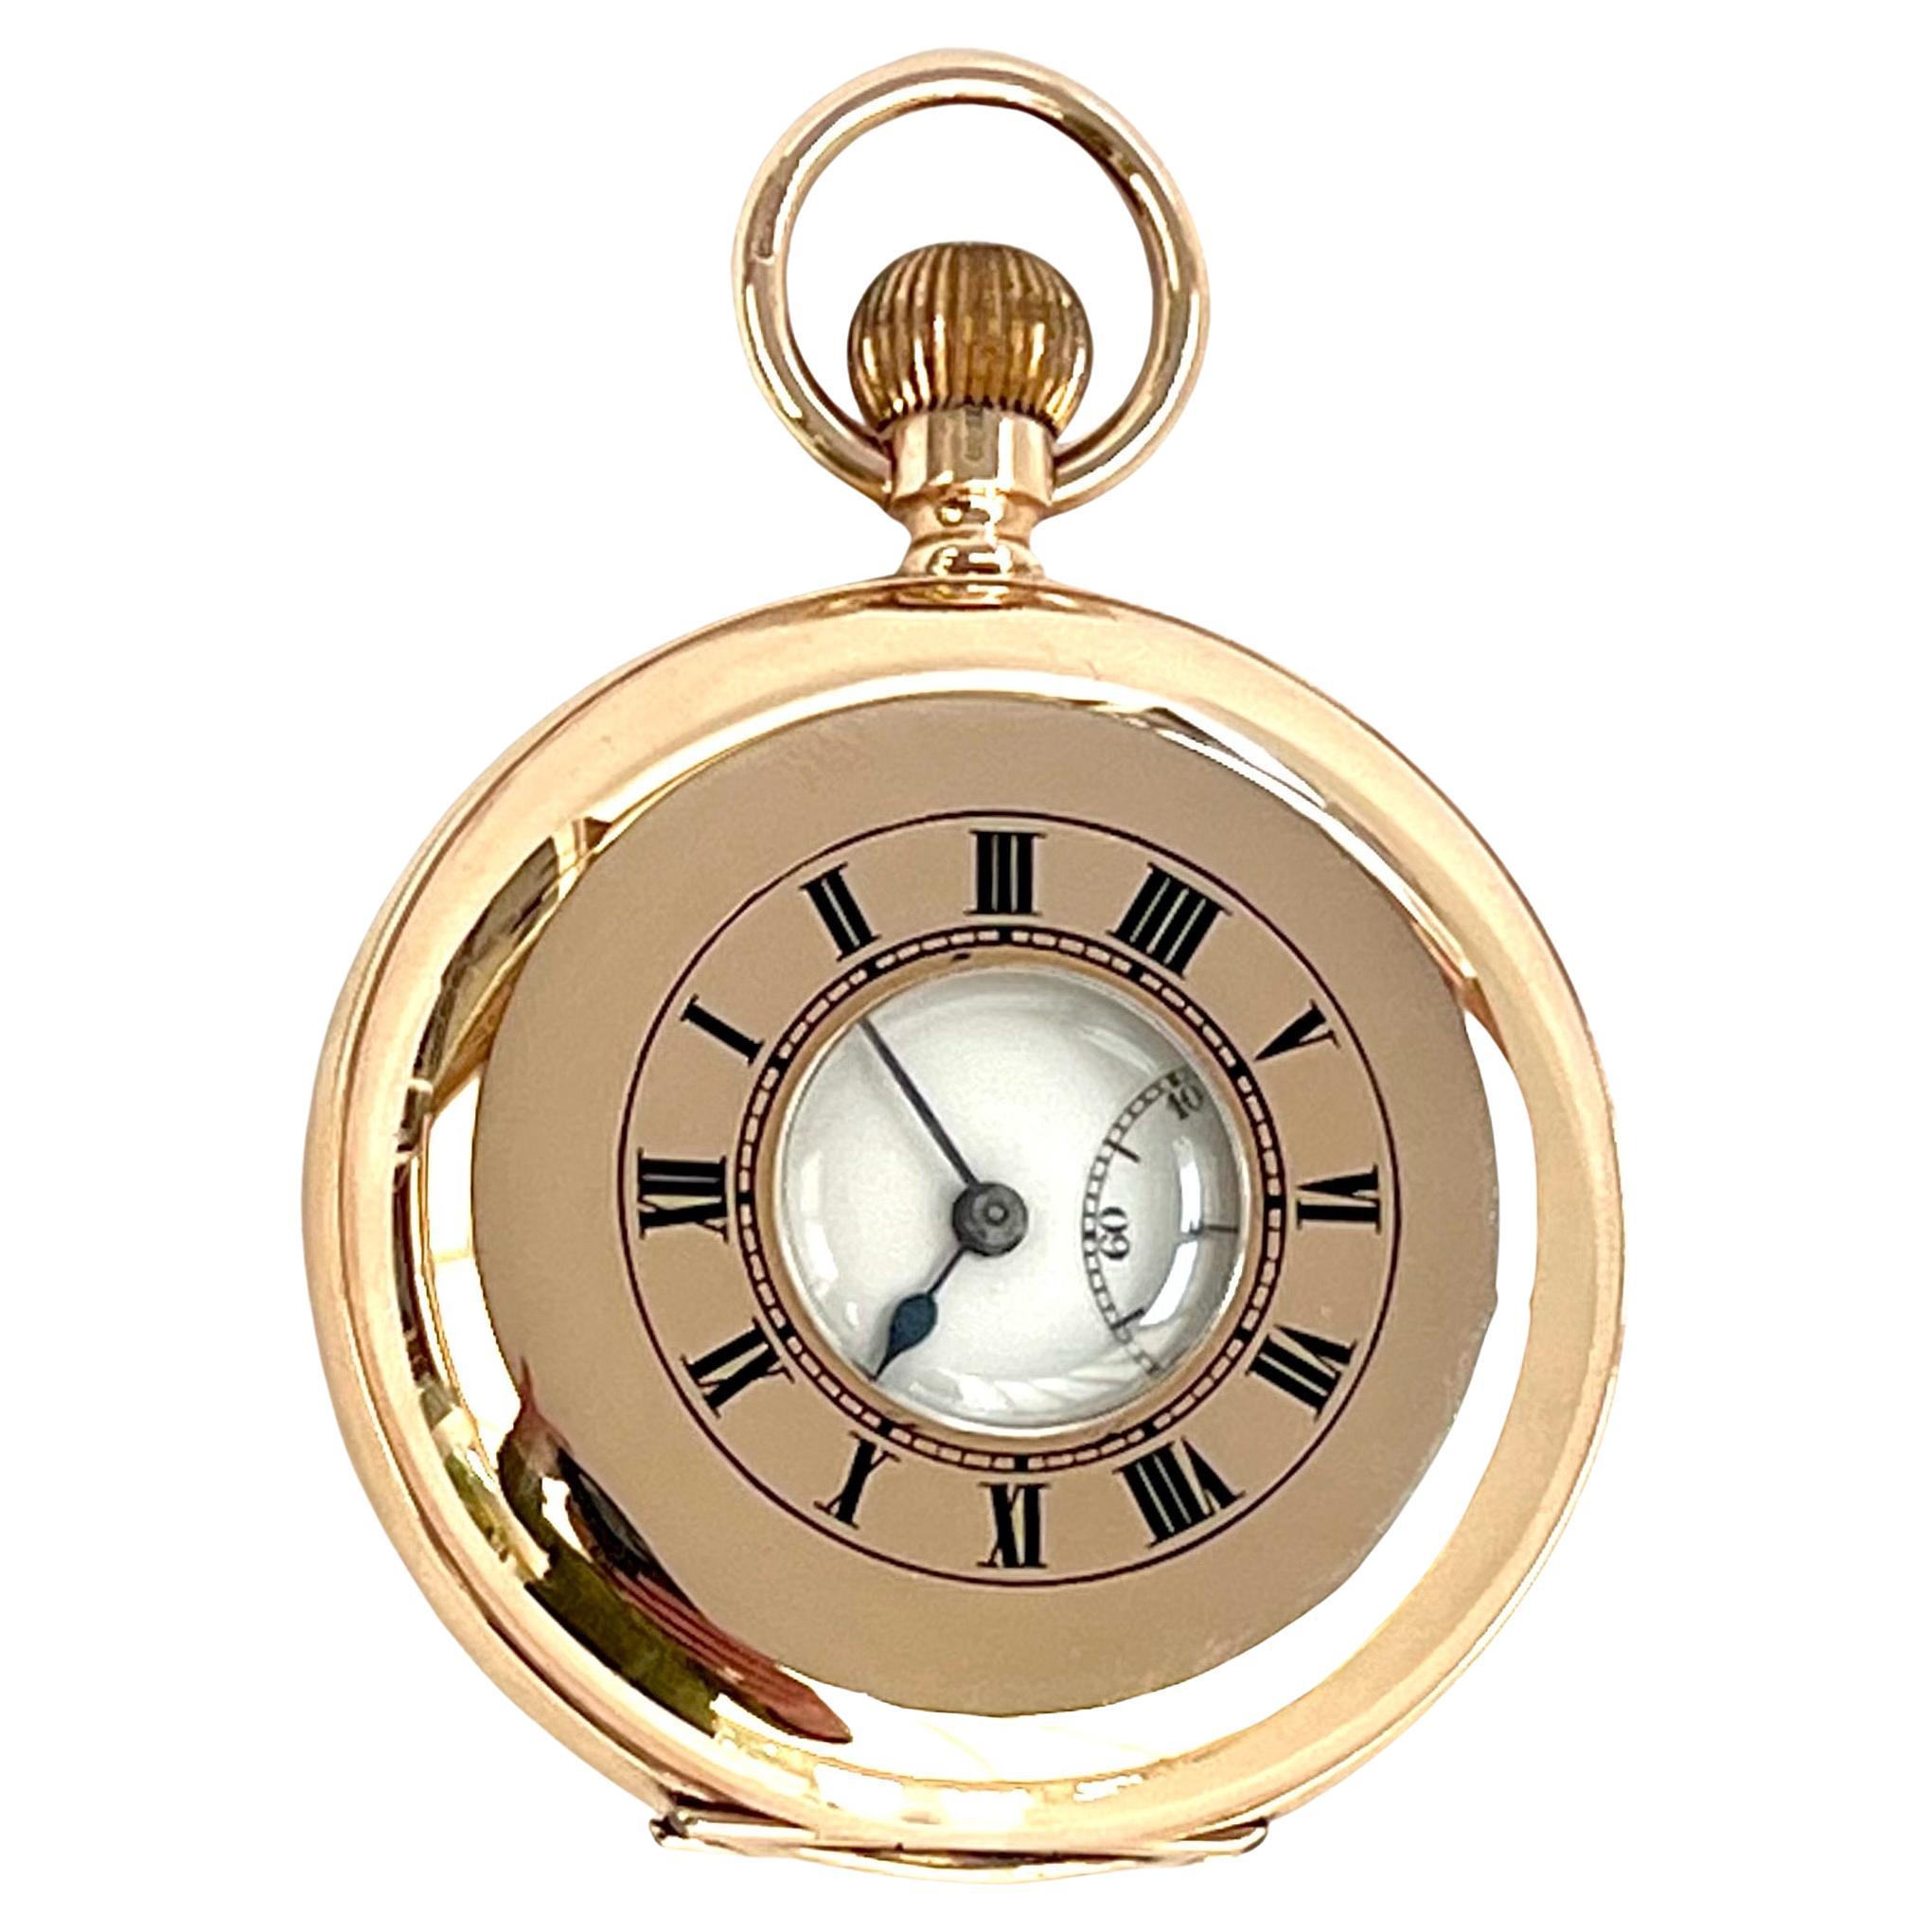 What is a full hunter pocket watch?